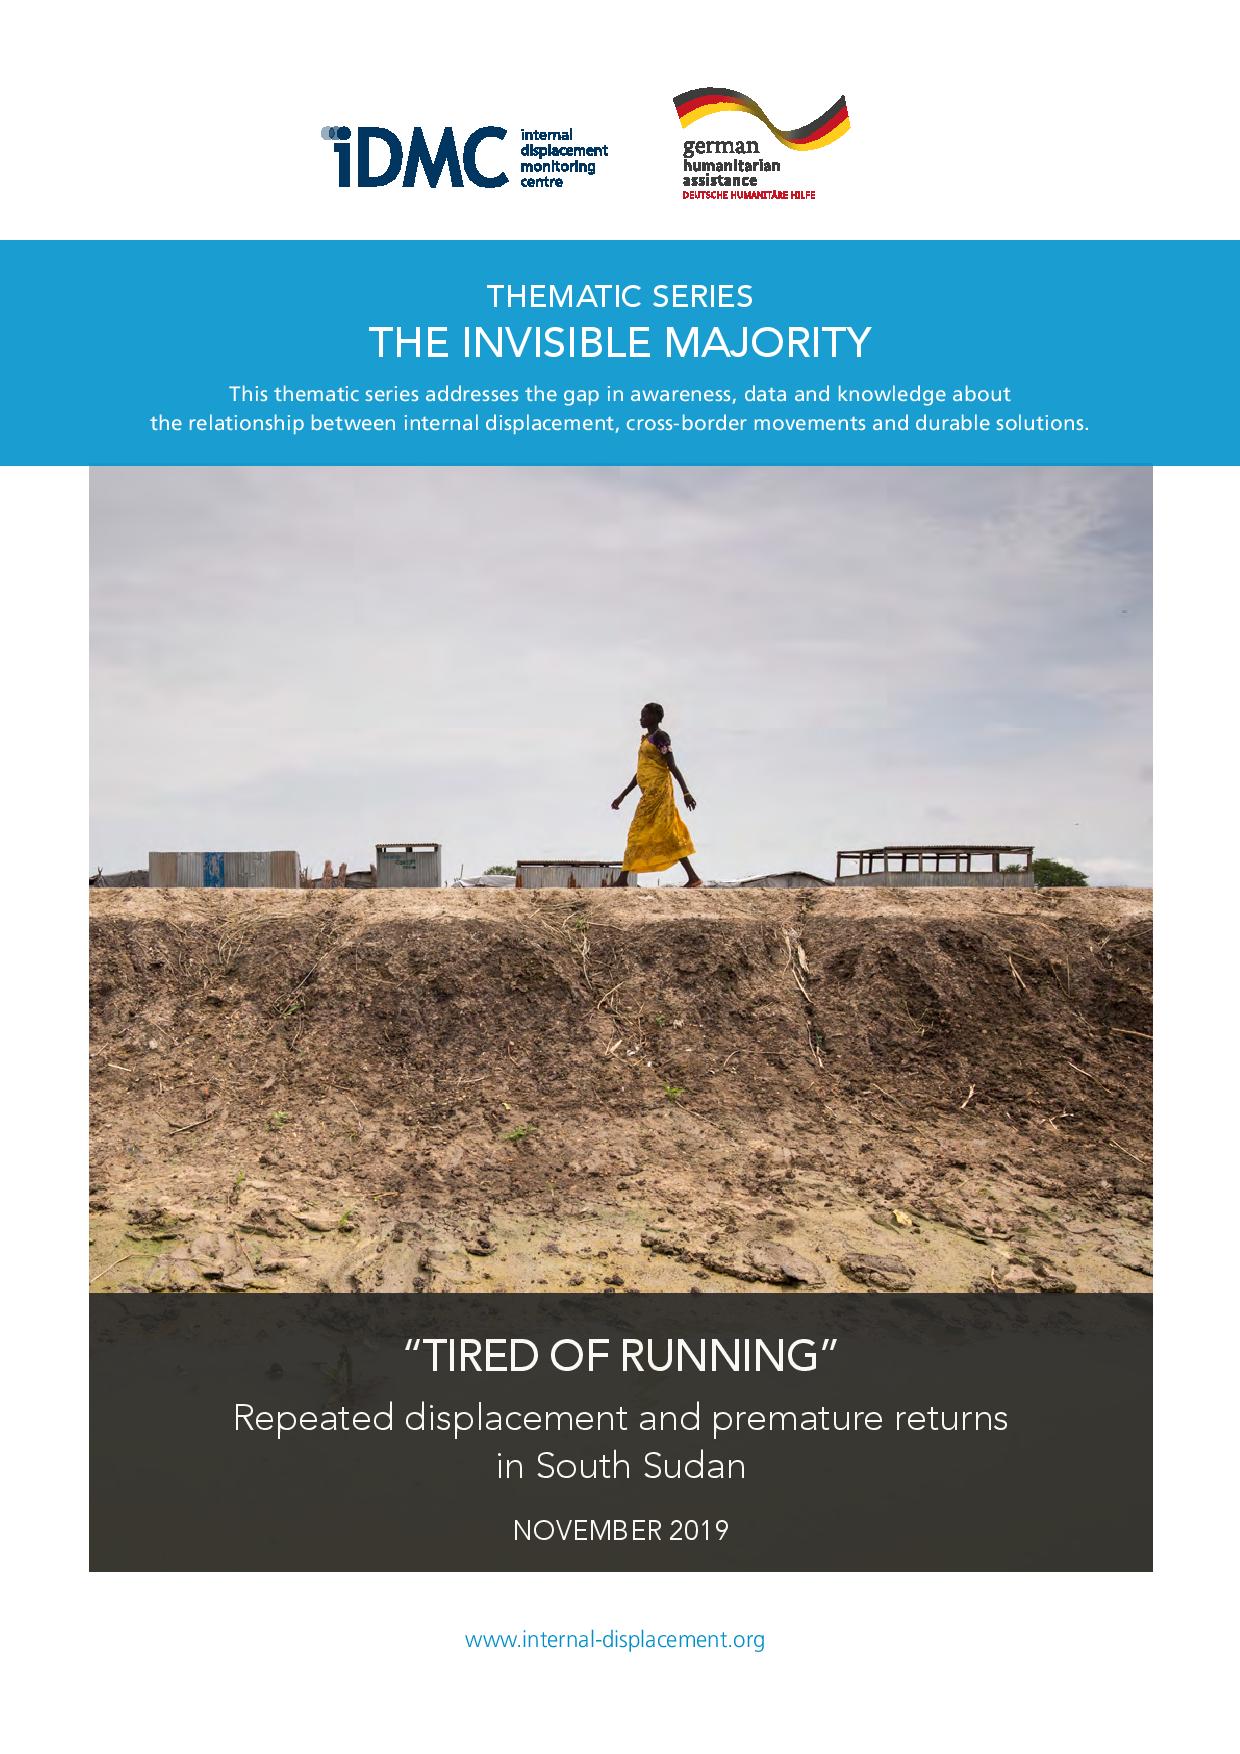 Tired of running: Repeated displacement and premature returns in South Sudan